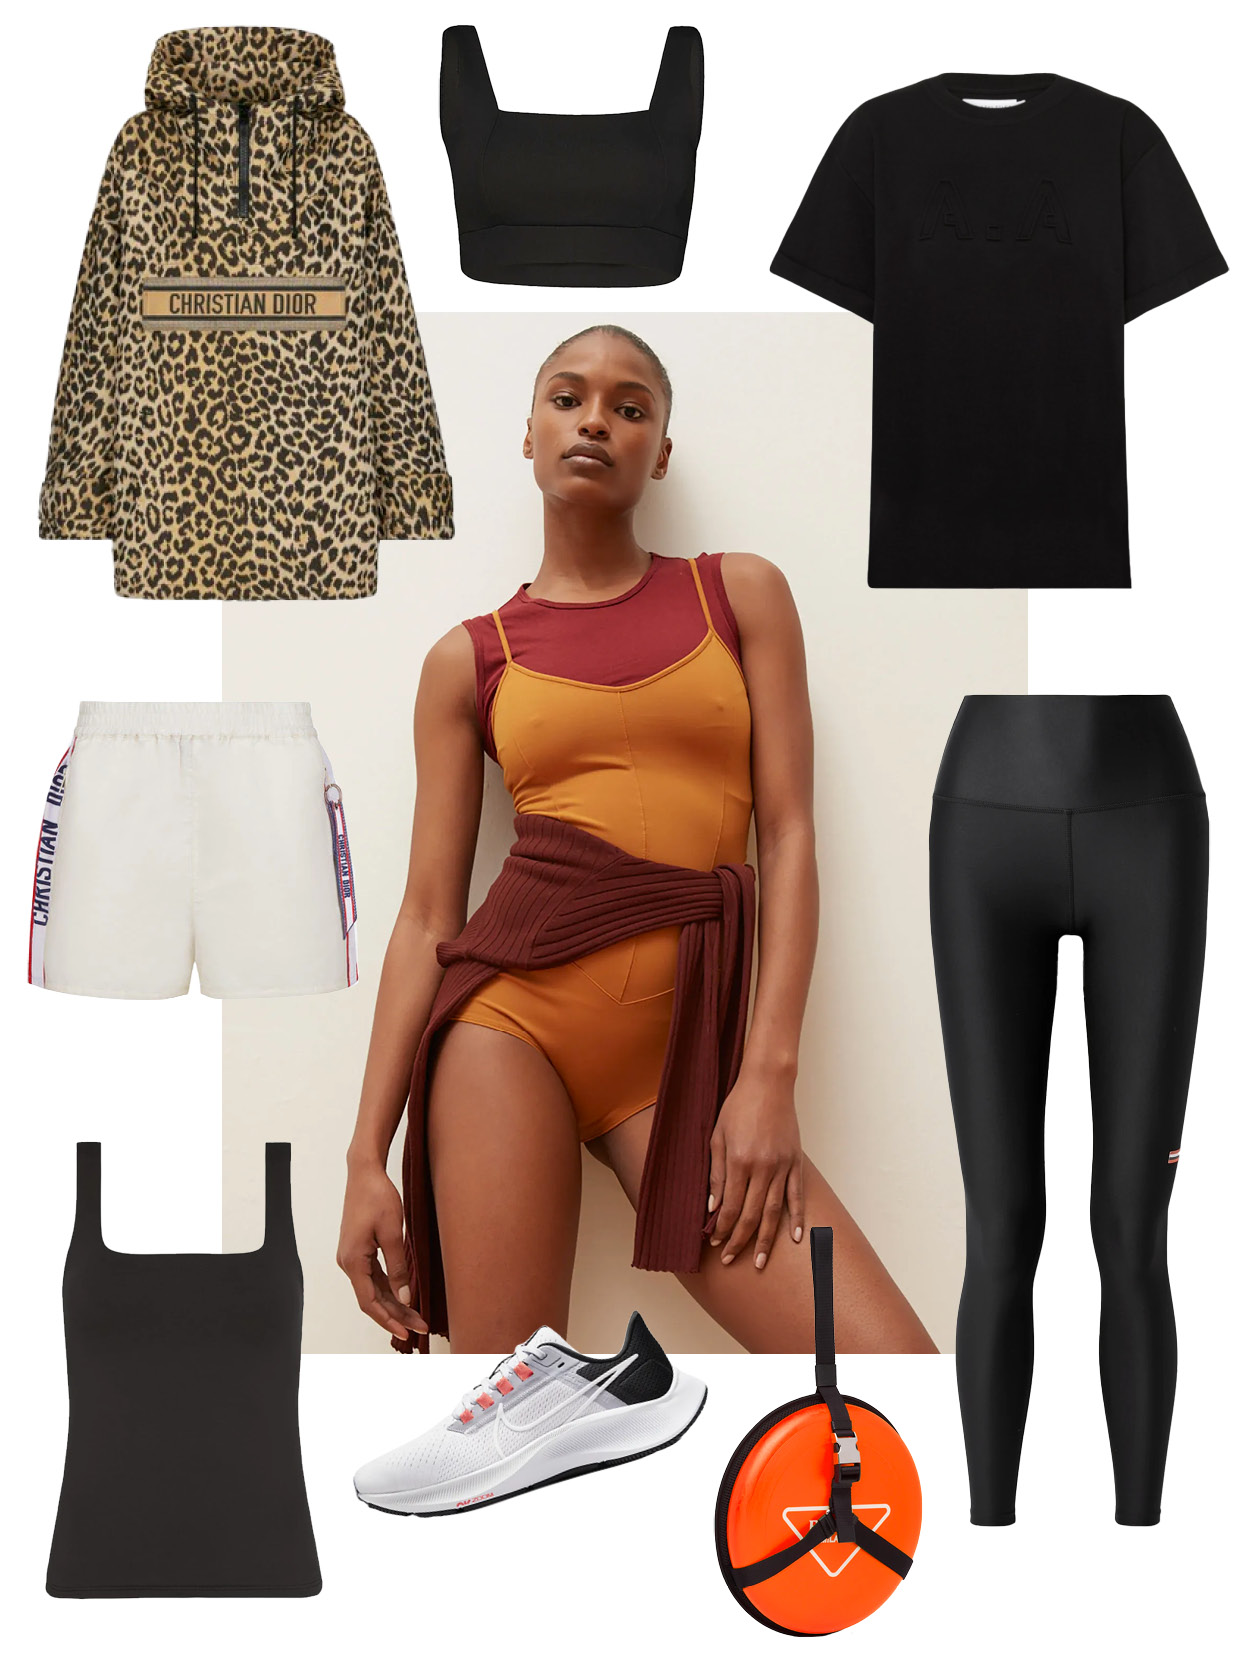 Chic and sleek activewear to get you back in your groove